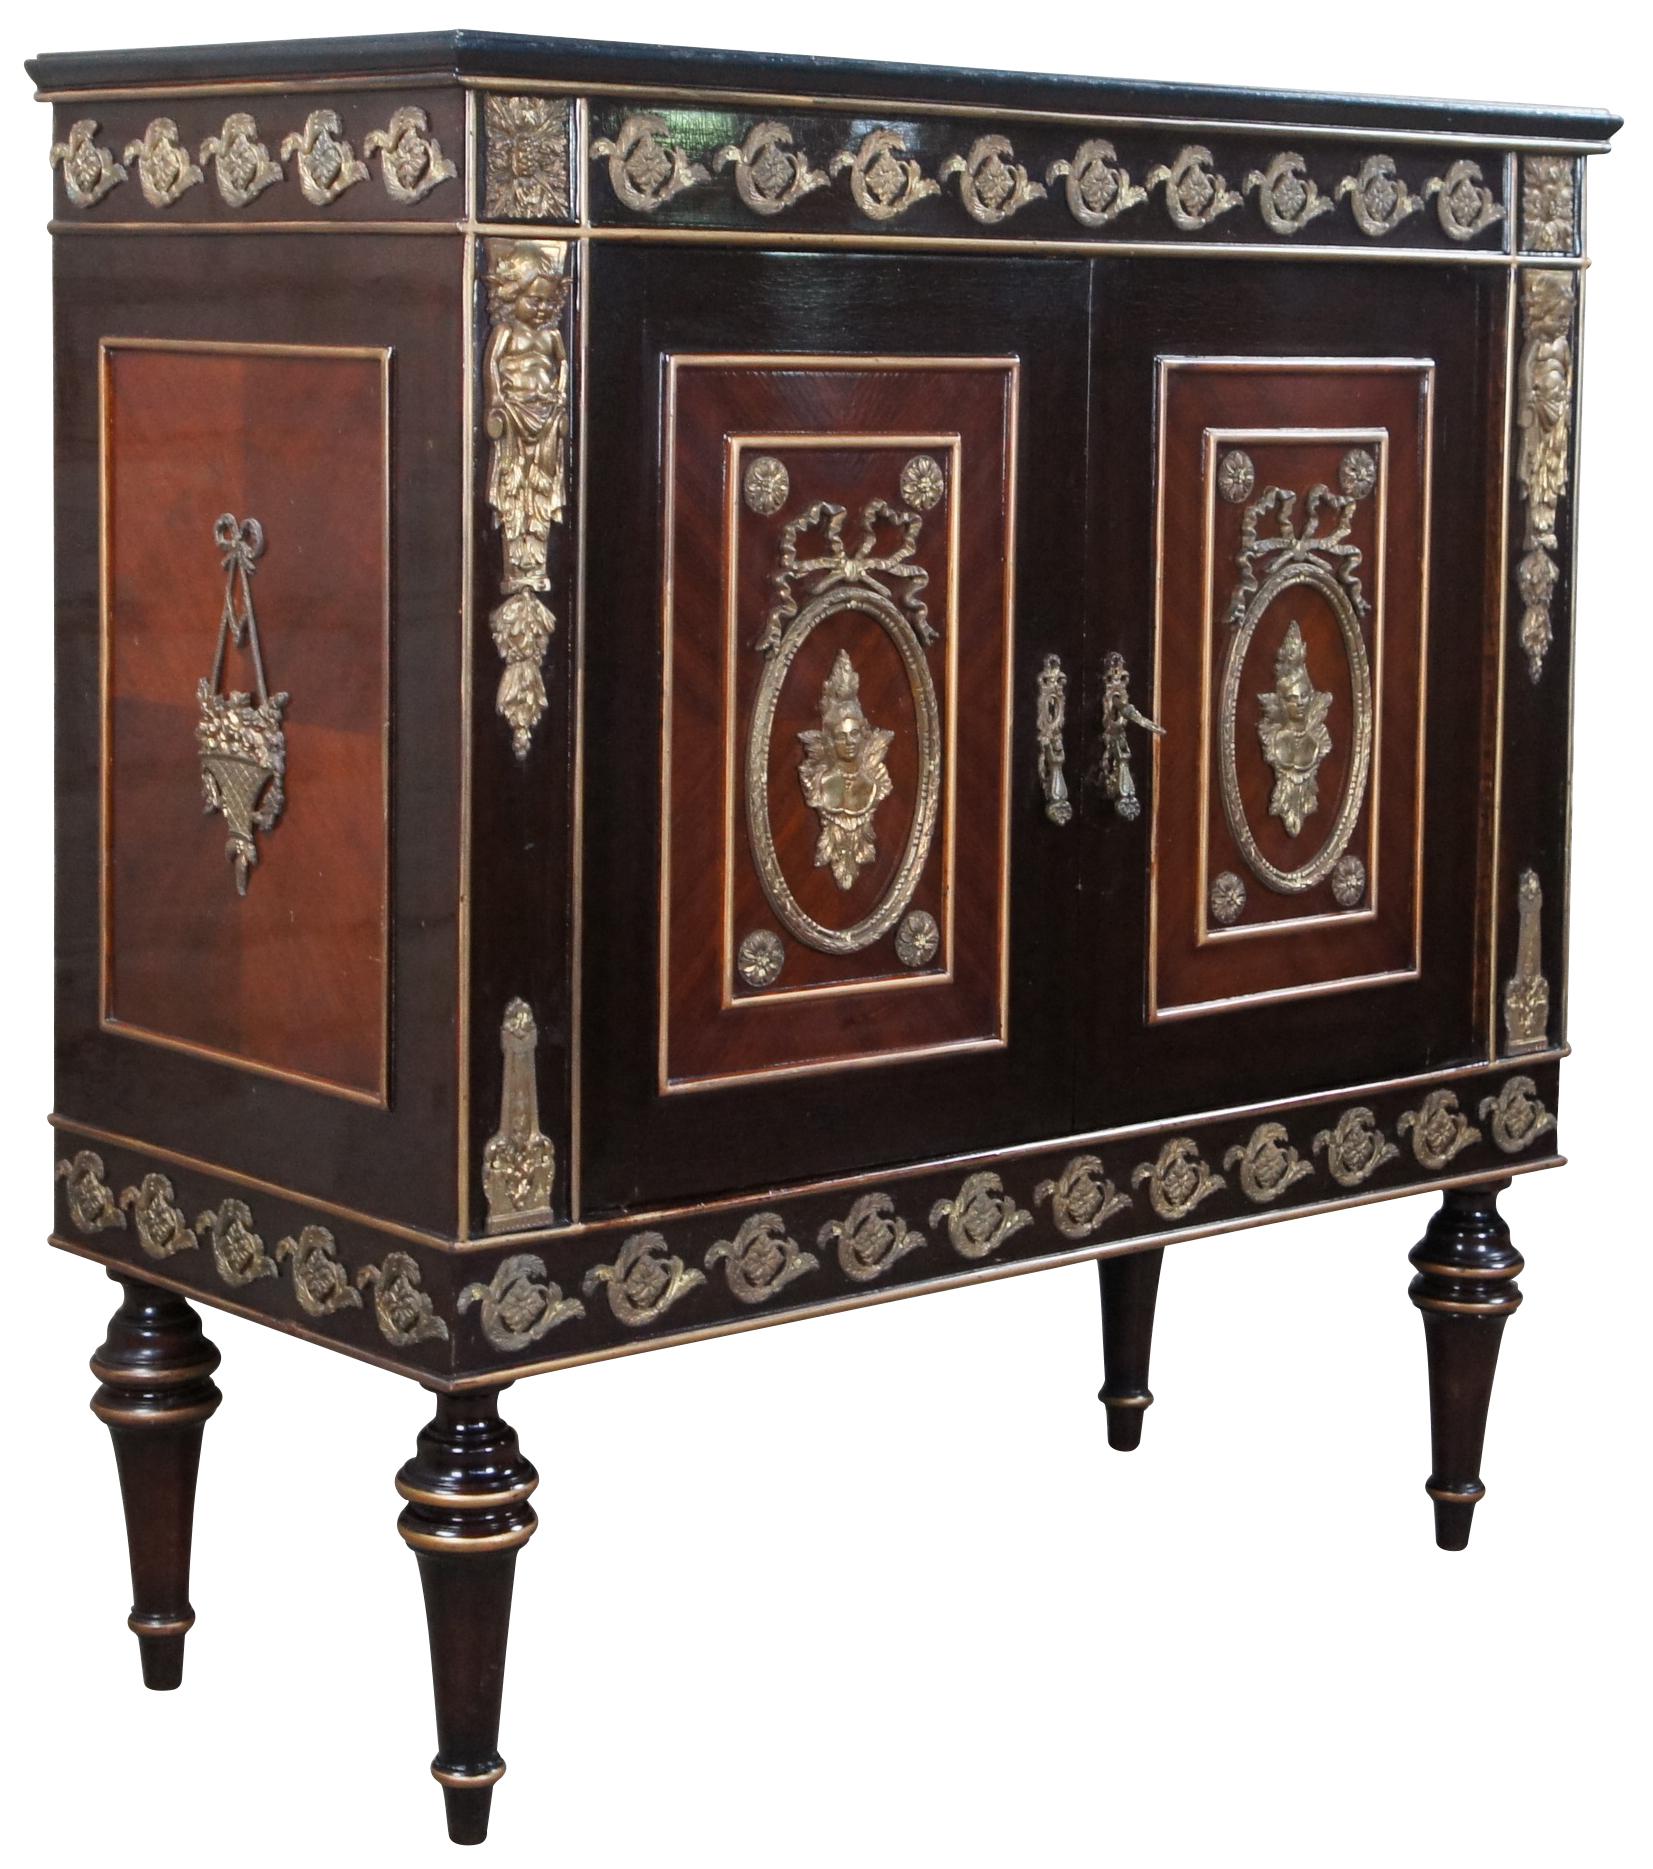 Vintage French Louis XVI inspired petite buffet, bar cabinet, commode, hall console or server. Made in Cairo Egypt (Arabska Republika Egiptu) by Abbas, circa 1972. Made of ebonized mahogany featuring ornate brass medallions, ormolu figural mounts,